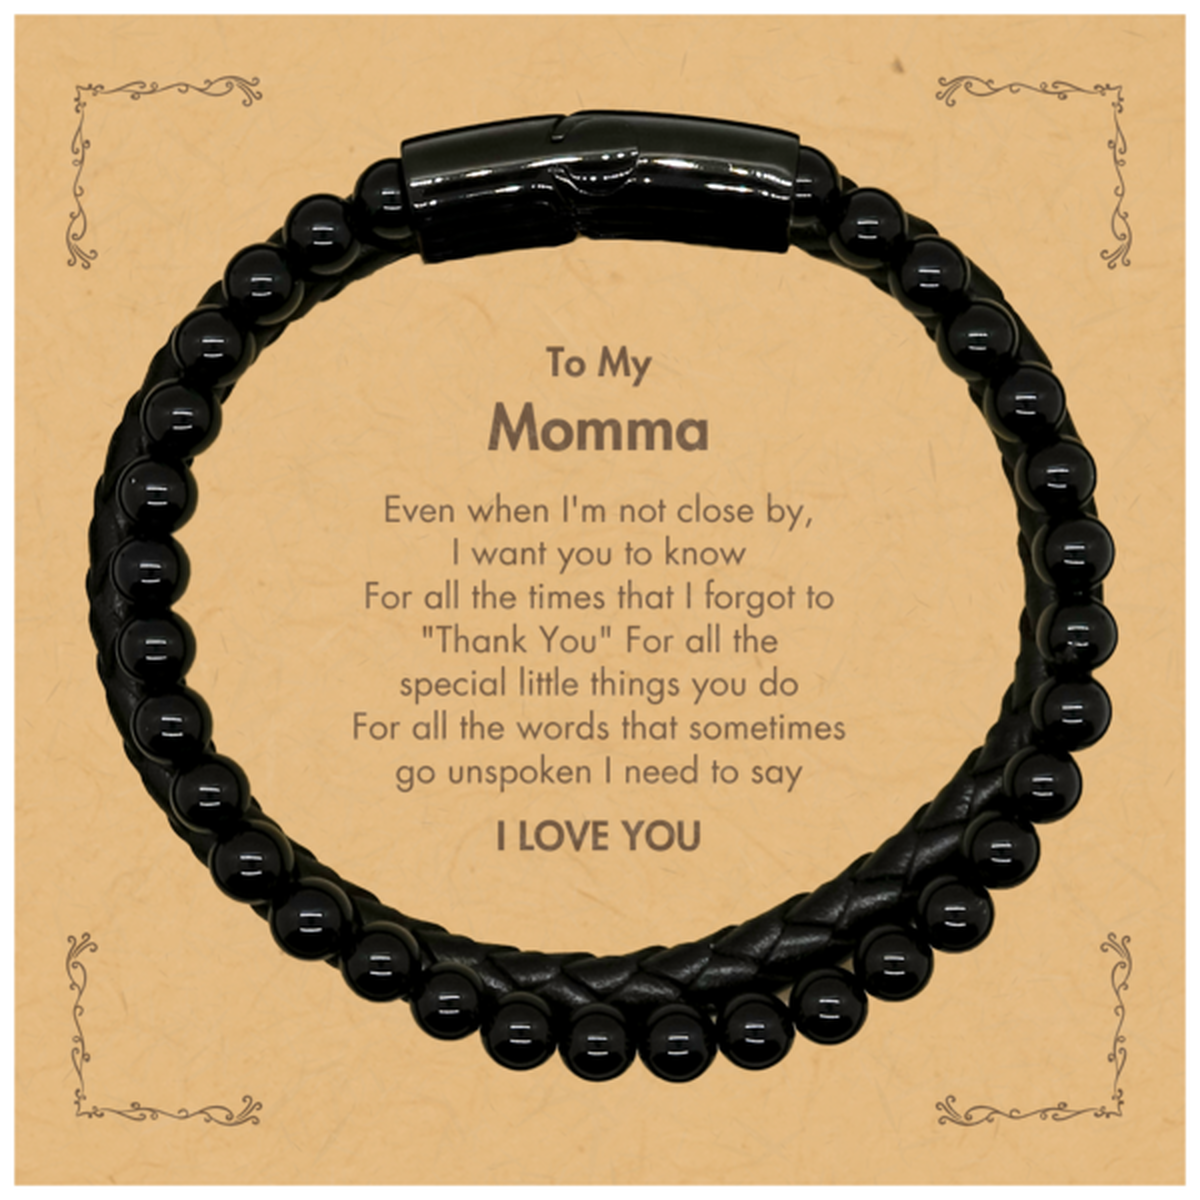 Thank You Gifts for Momma, Keepsake Stone Leather Bracelets Gifts for Momma Birthday Mother's day Father's Day Momma For all the words That sometimes go unspoken I need to say I LOVE YOU